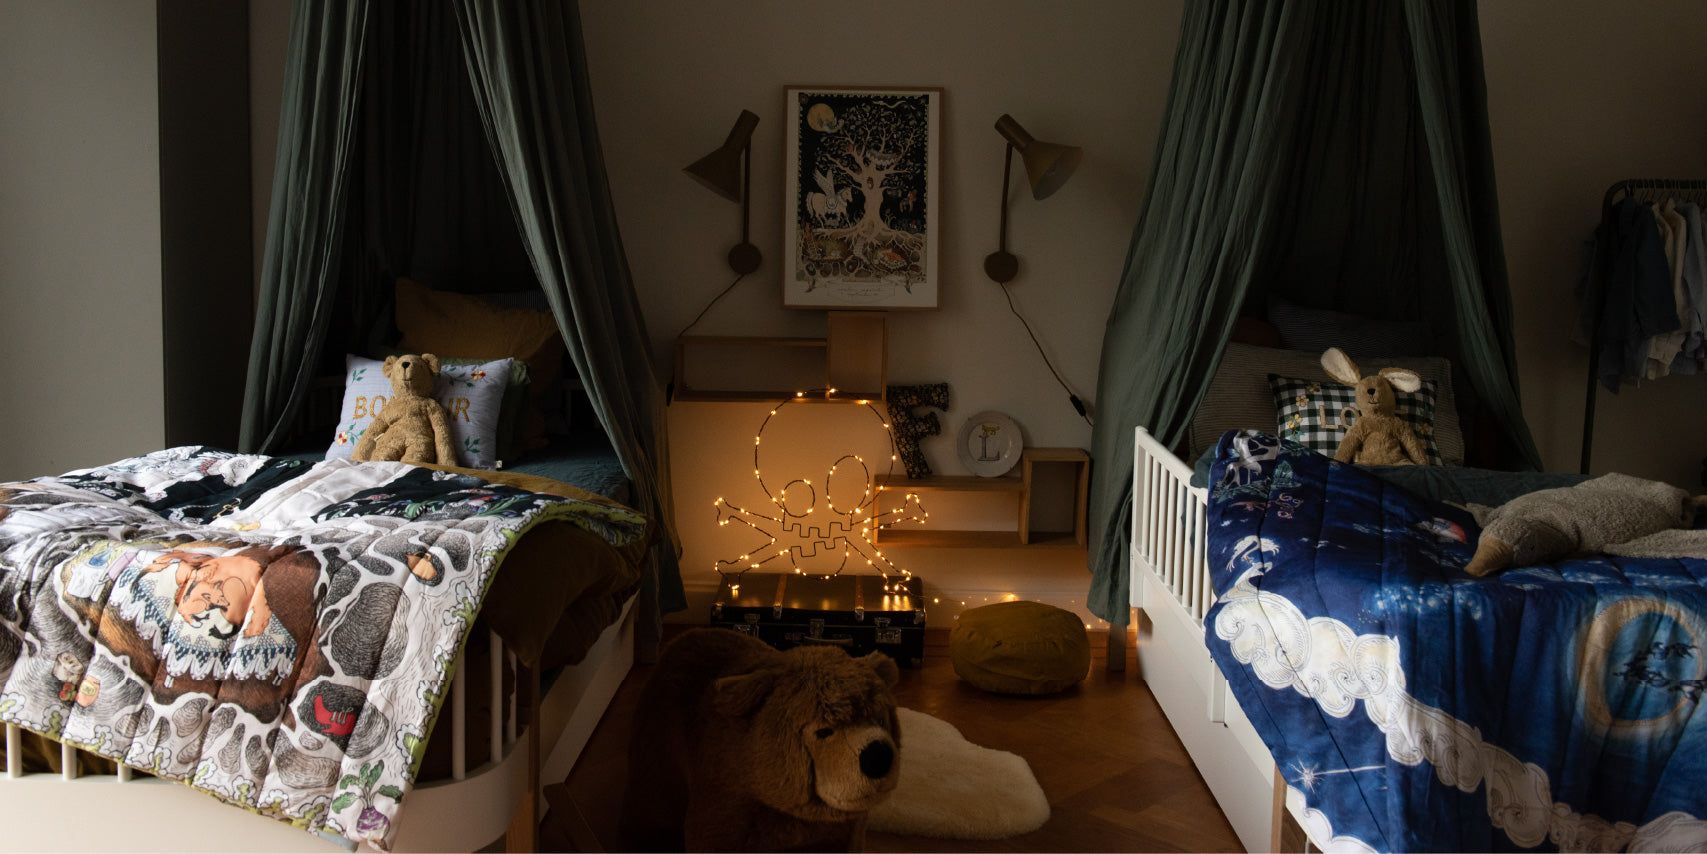 Magical bedding from Forivor